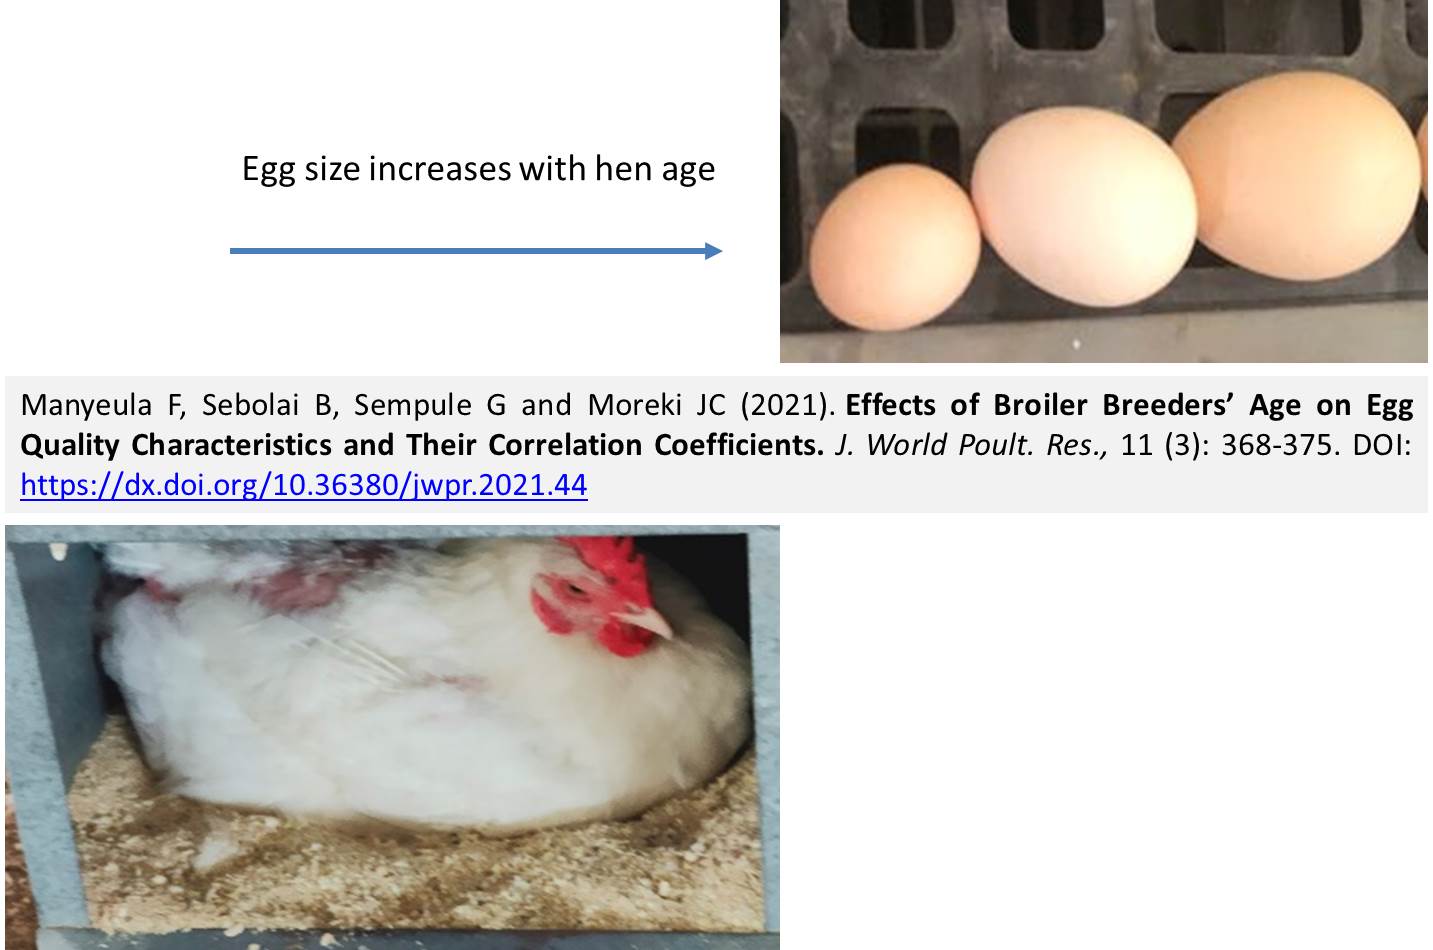 76-Broiler_Breeders_Age_on_Egg_Quality